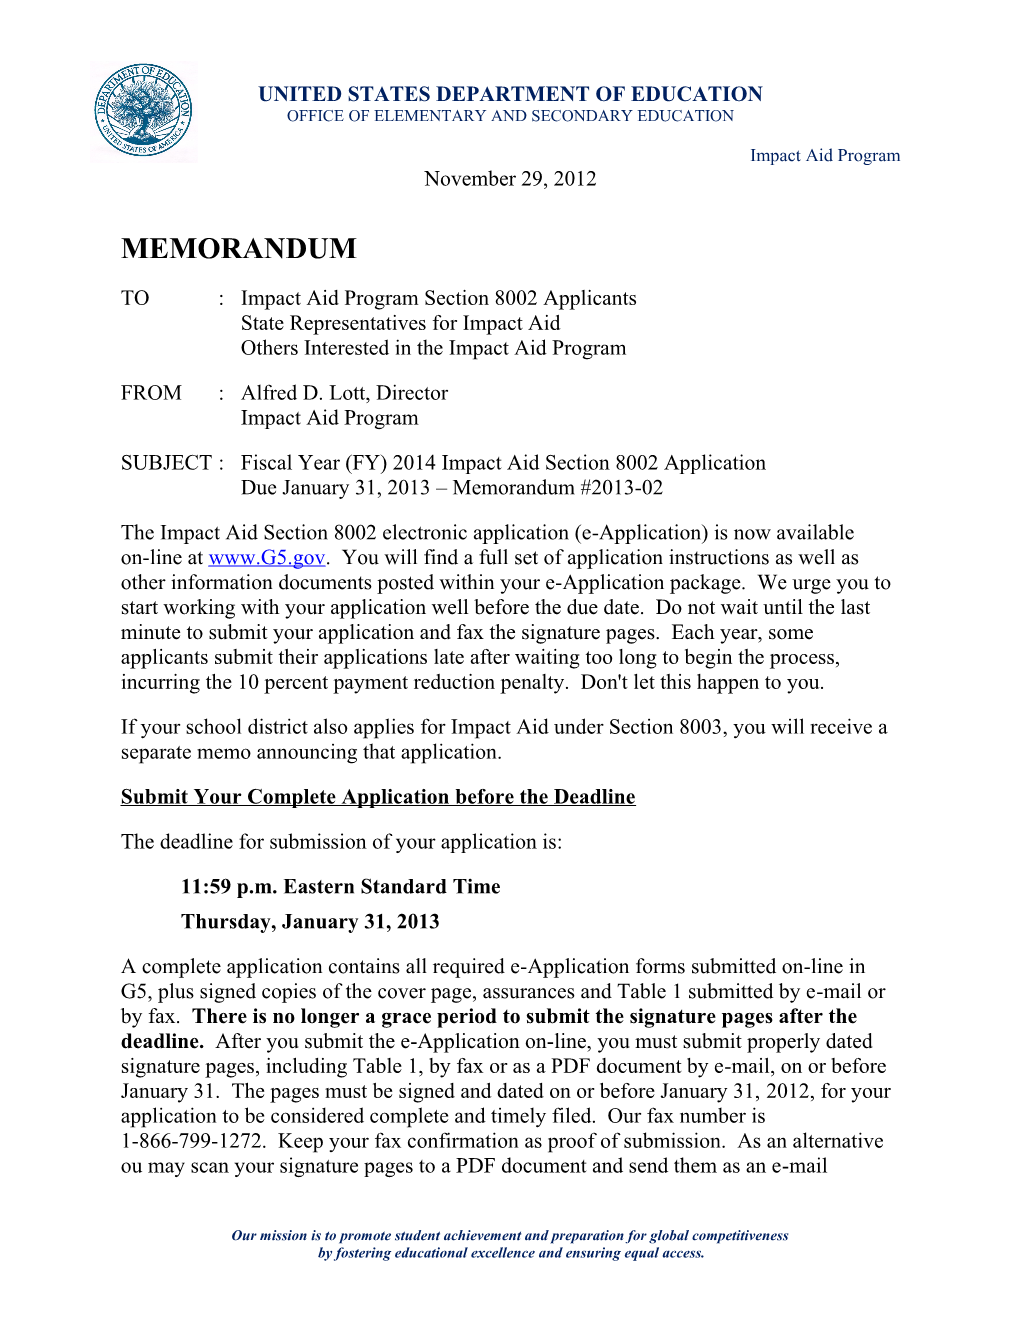 Section 8002 FY 2014 Impact Aid Program Application Memo (MSWORD)